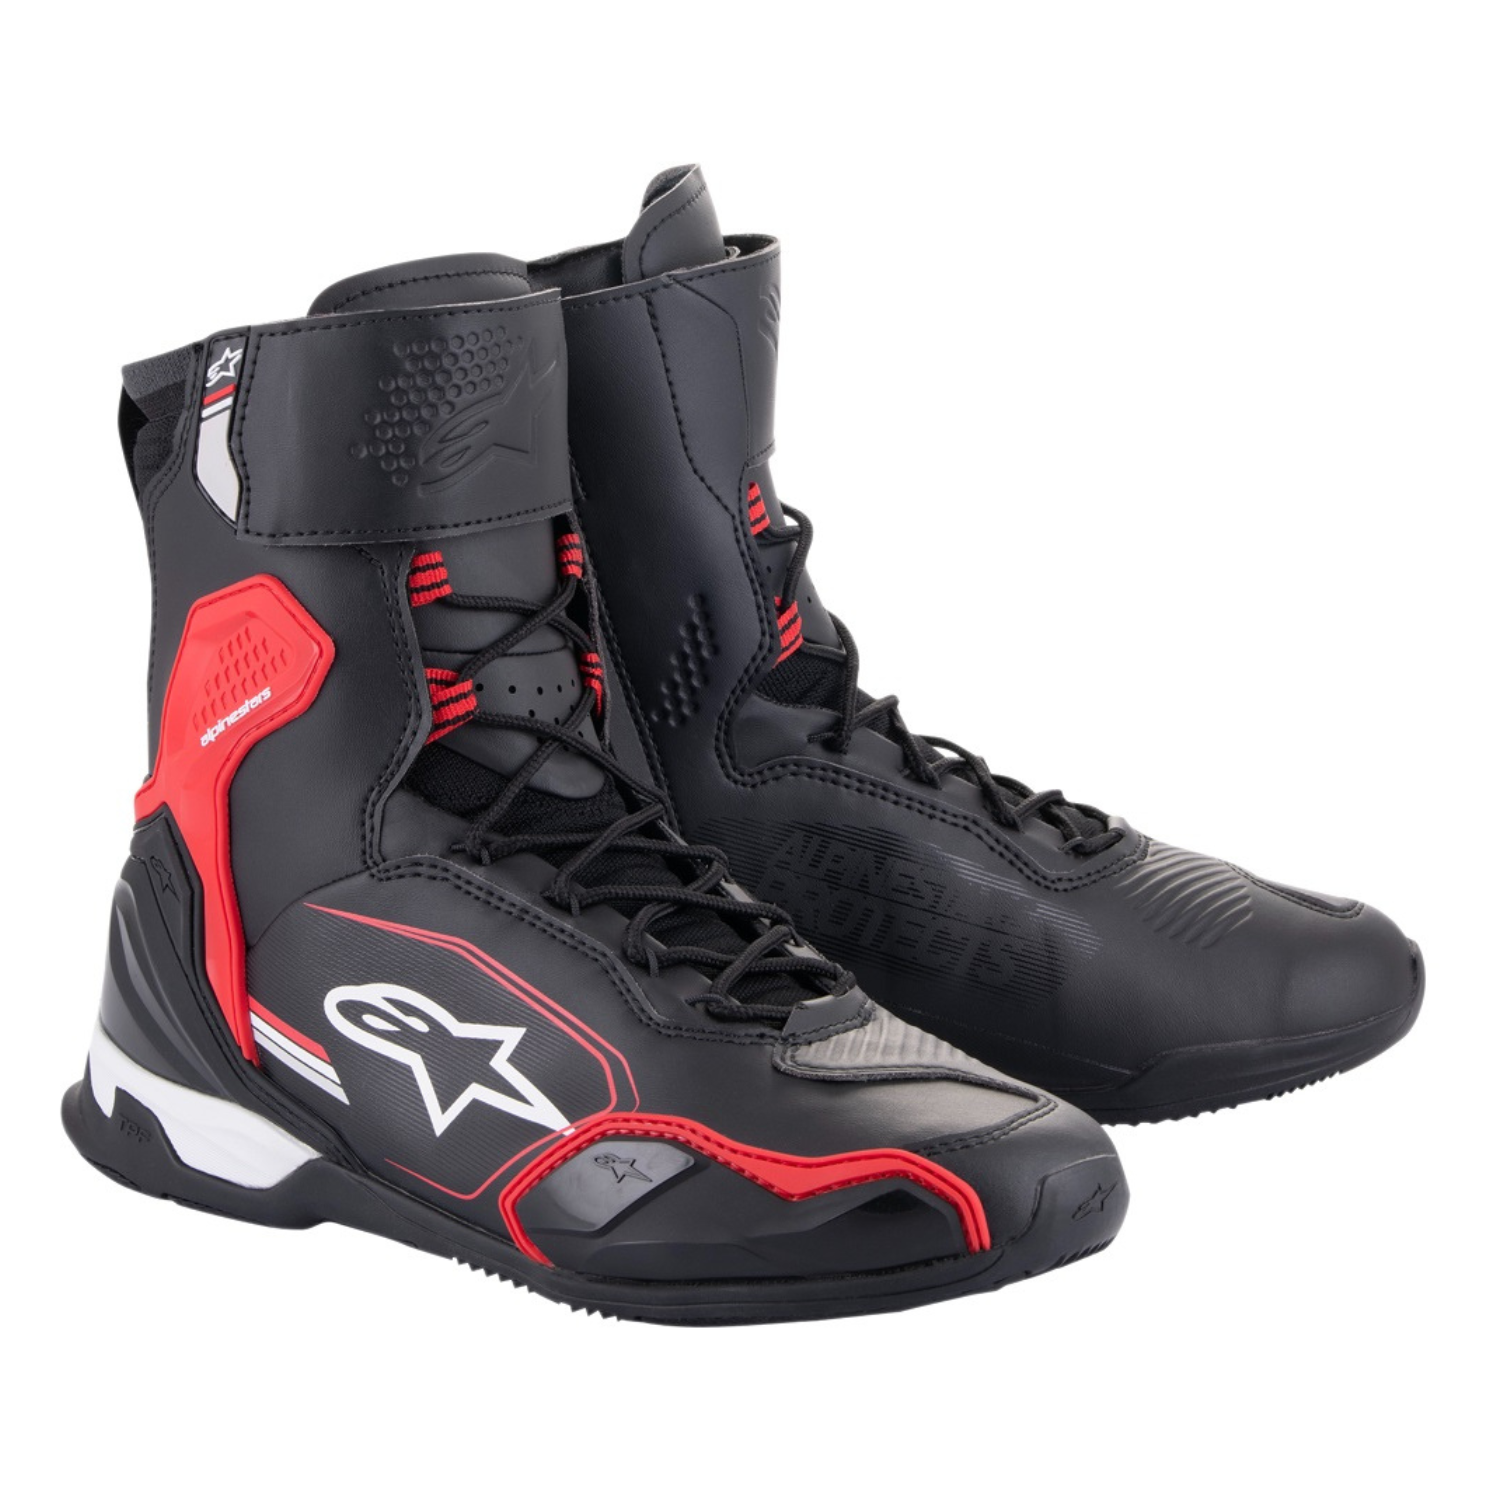 Image of Alpinestars Superfaster Shoes Black Bright Red White Taille US 125